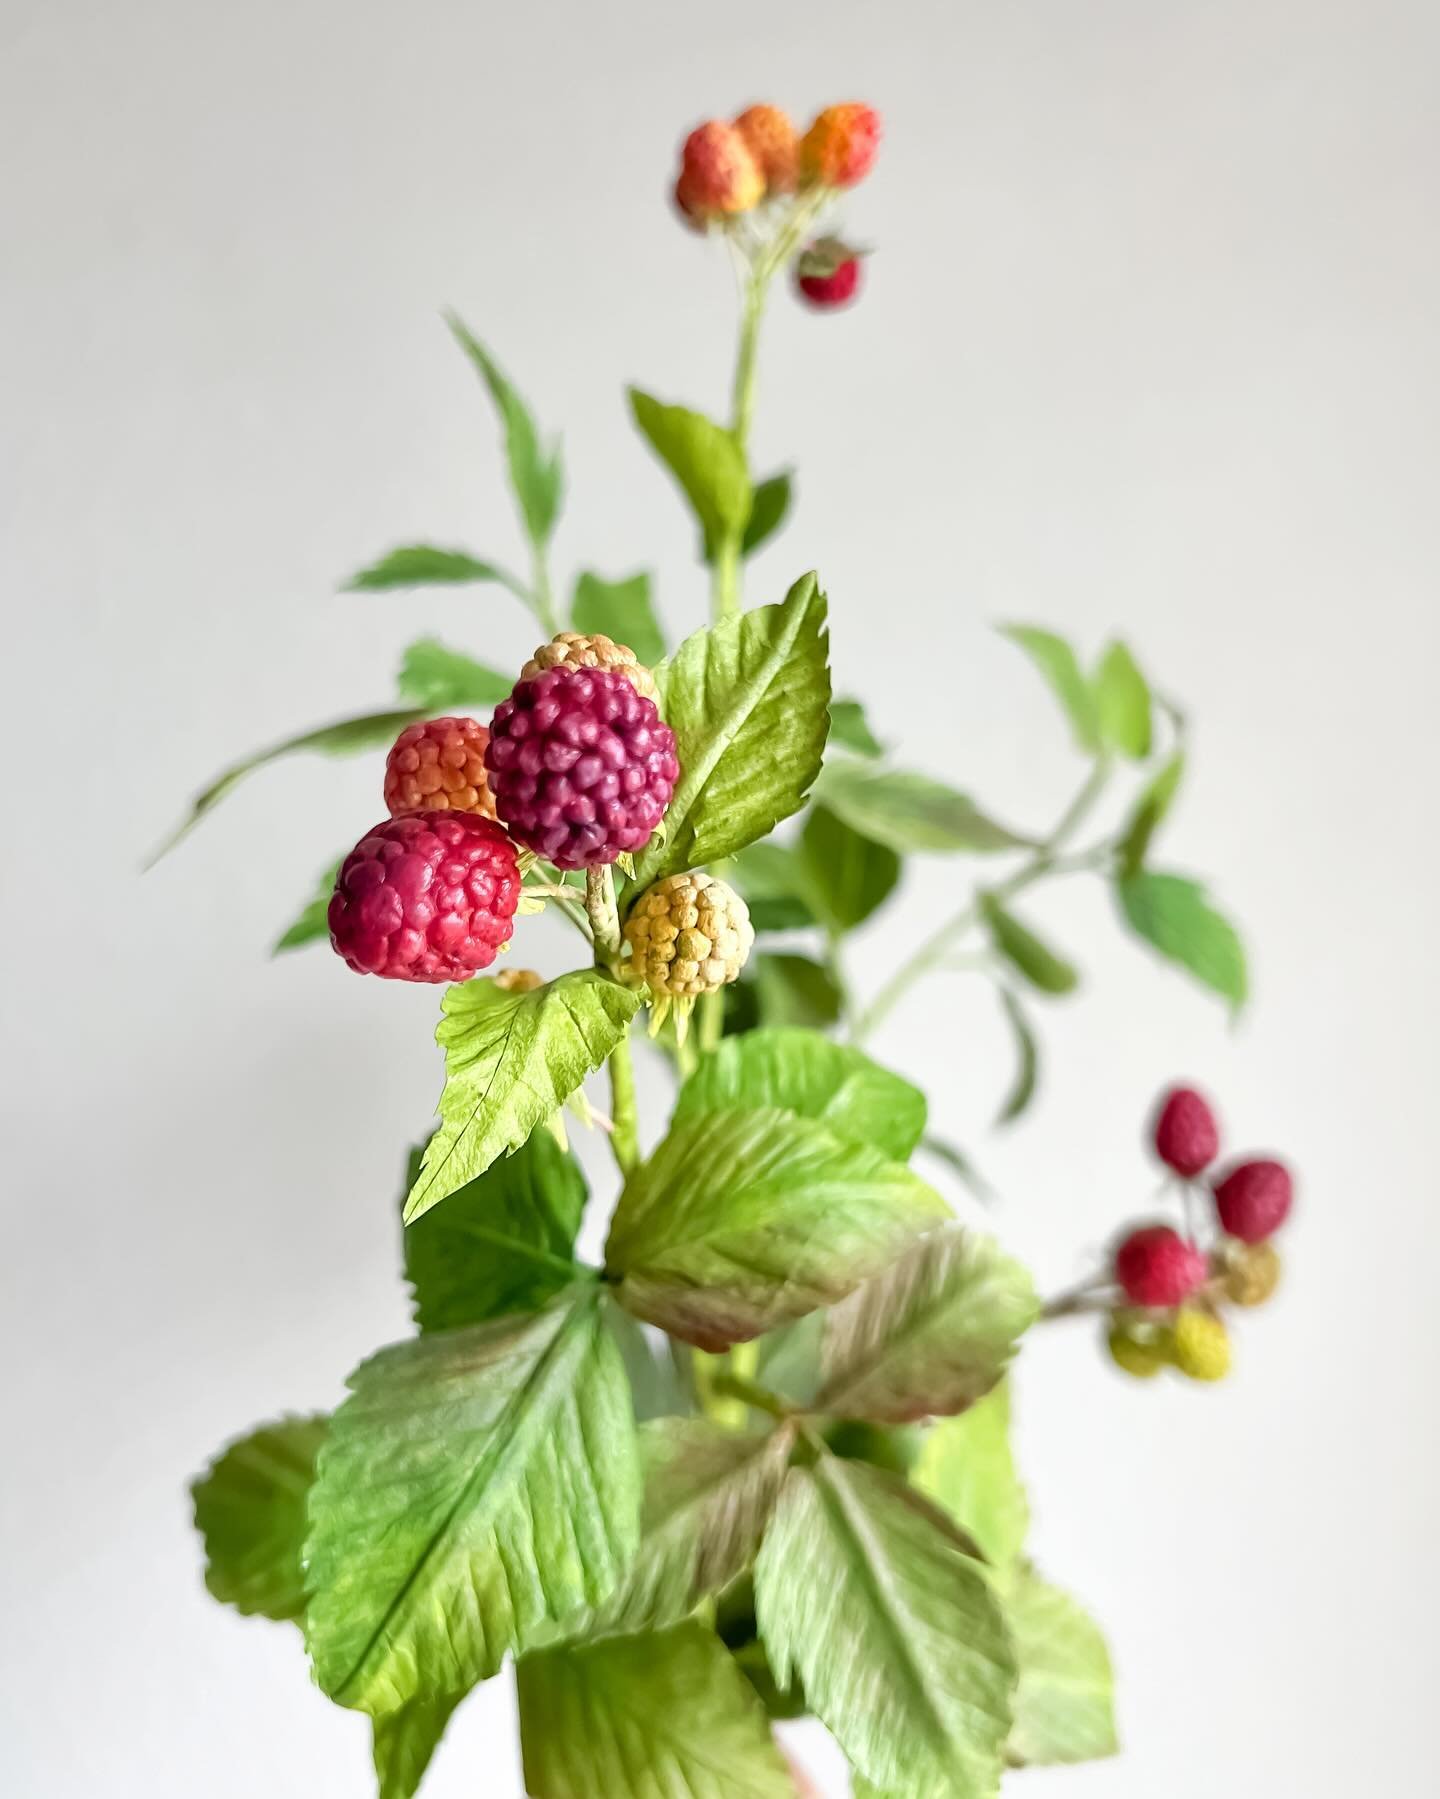 Handmade raspberry: leaves, fruit, and other interesting tips.

I love raspberries, especially with chocolate! I could have painted them redder, but I wanted to create a darker tone, leaving some lighter and greener ones, as if ripening. Every time I